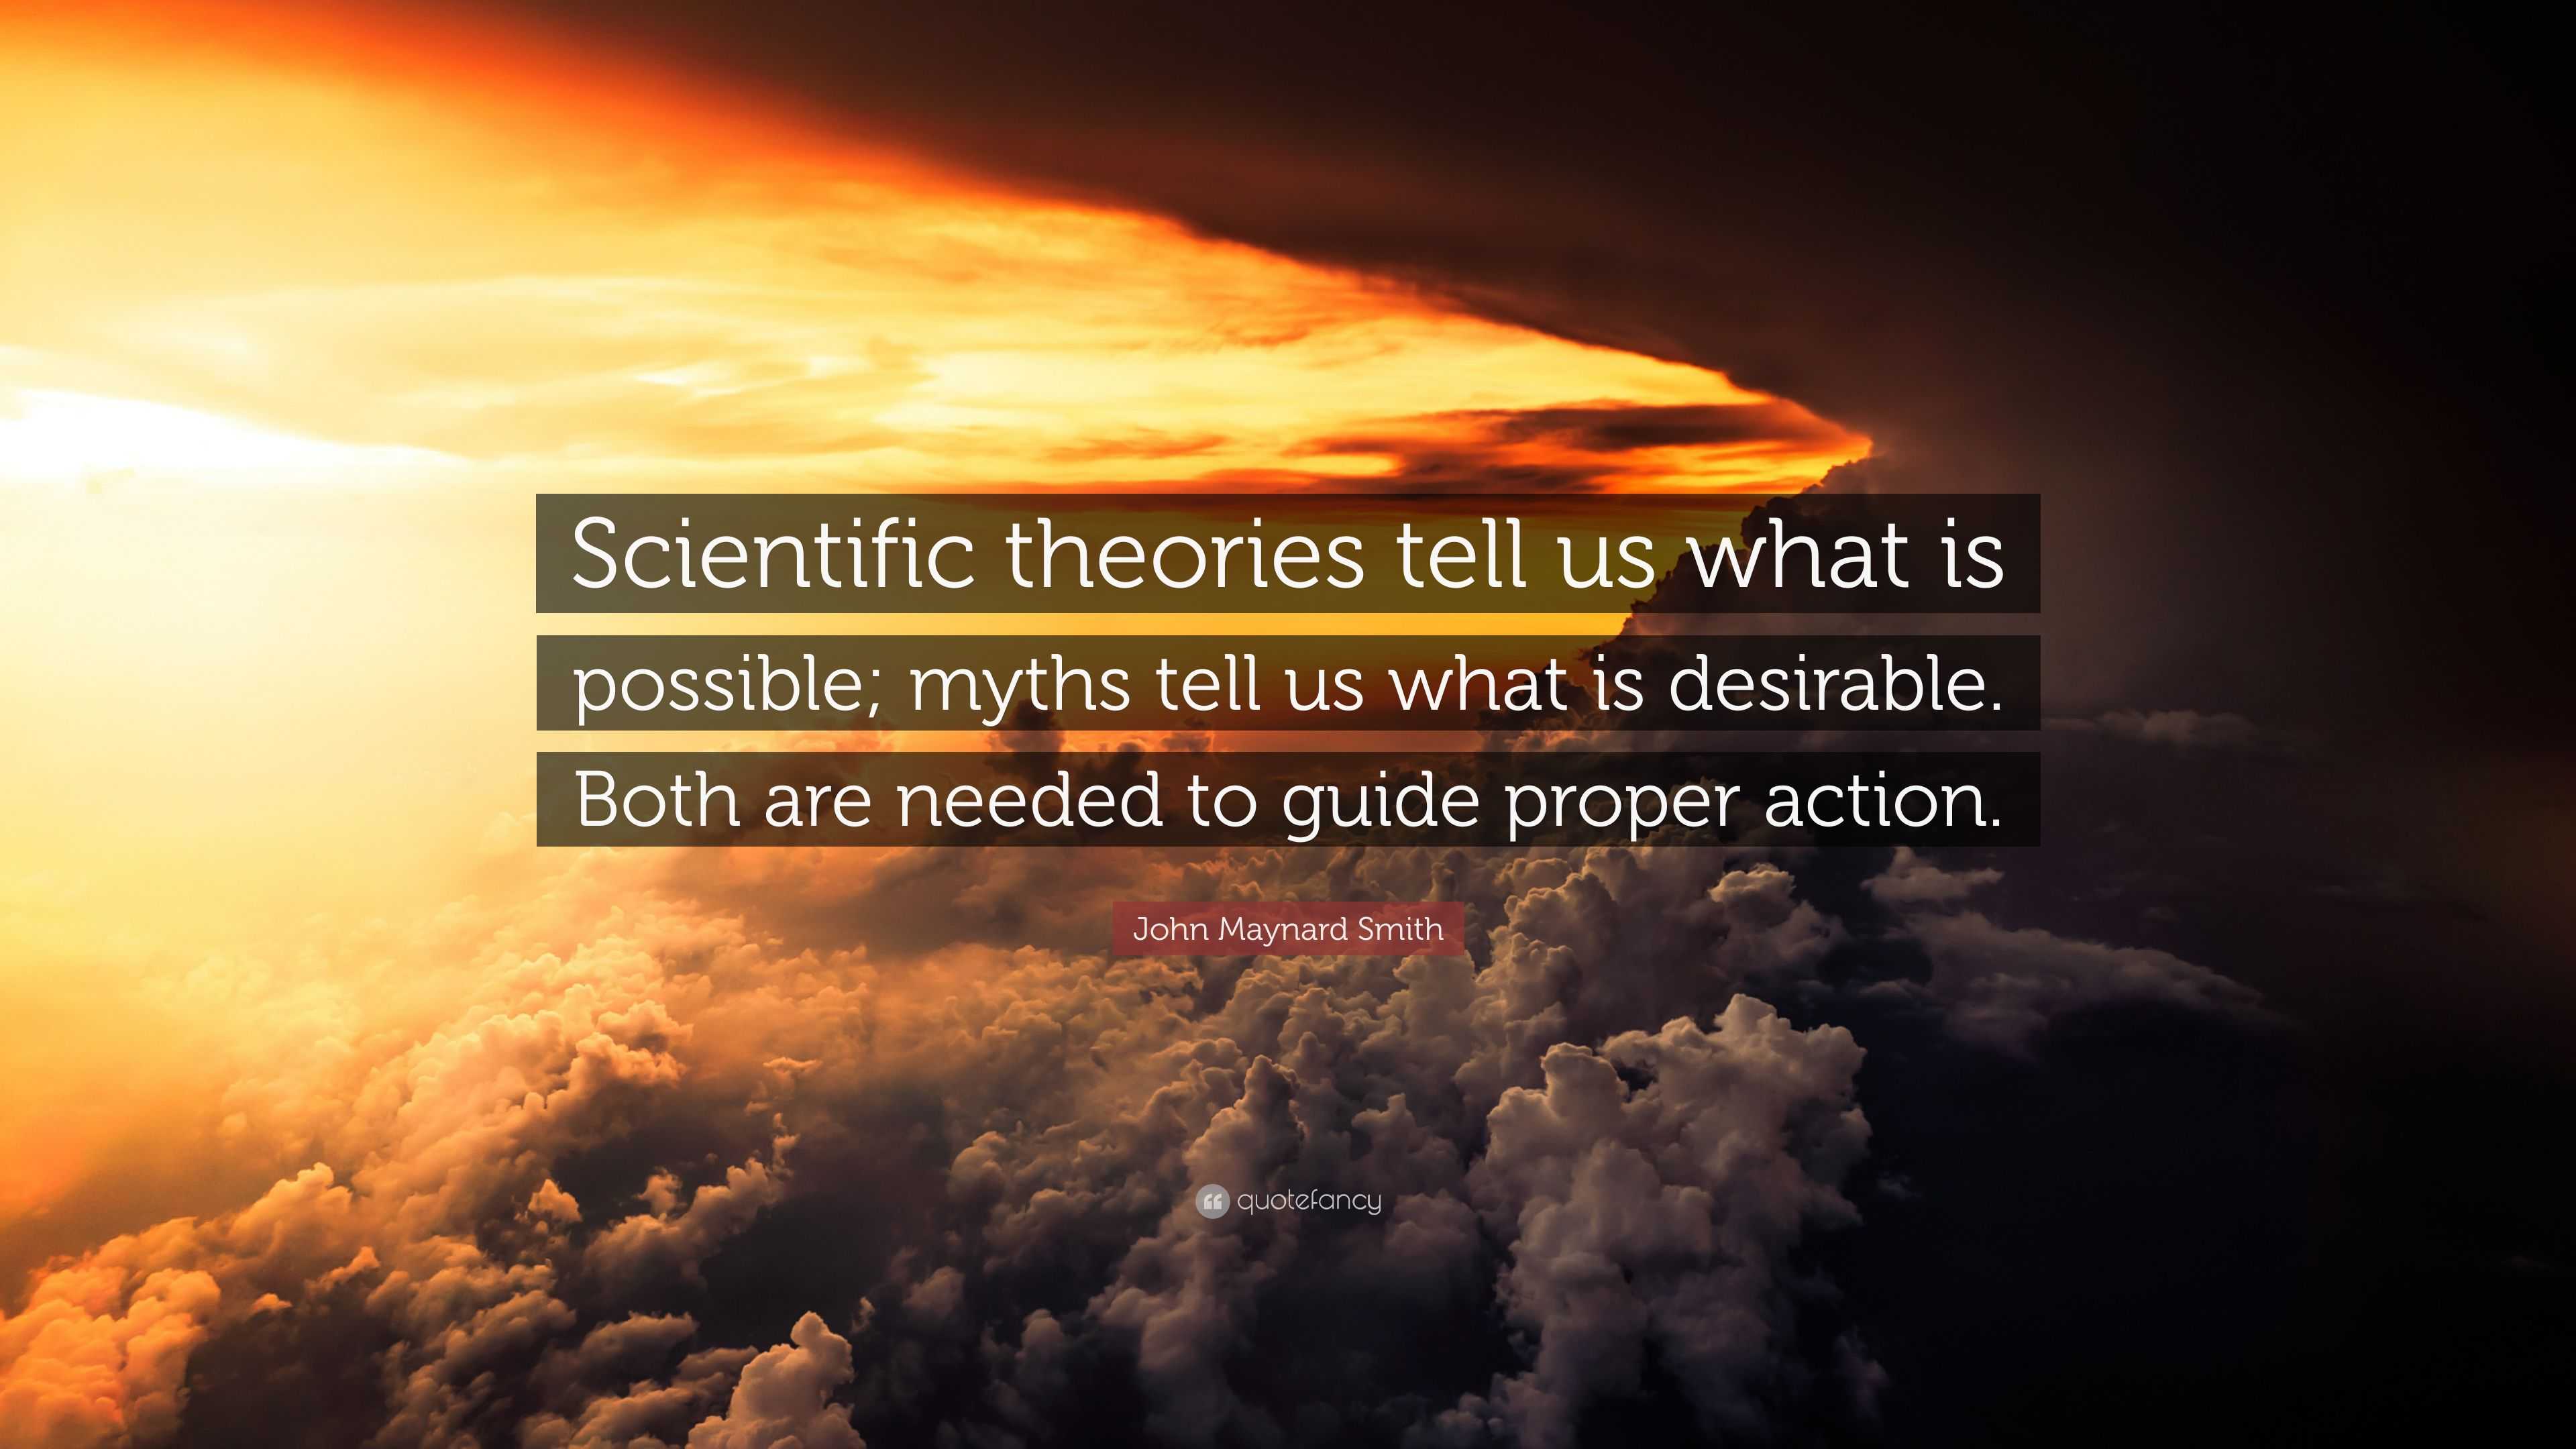 John Maynard Smith Quote: "Scientific theories tell us what is possible; myths tell us what is ...